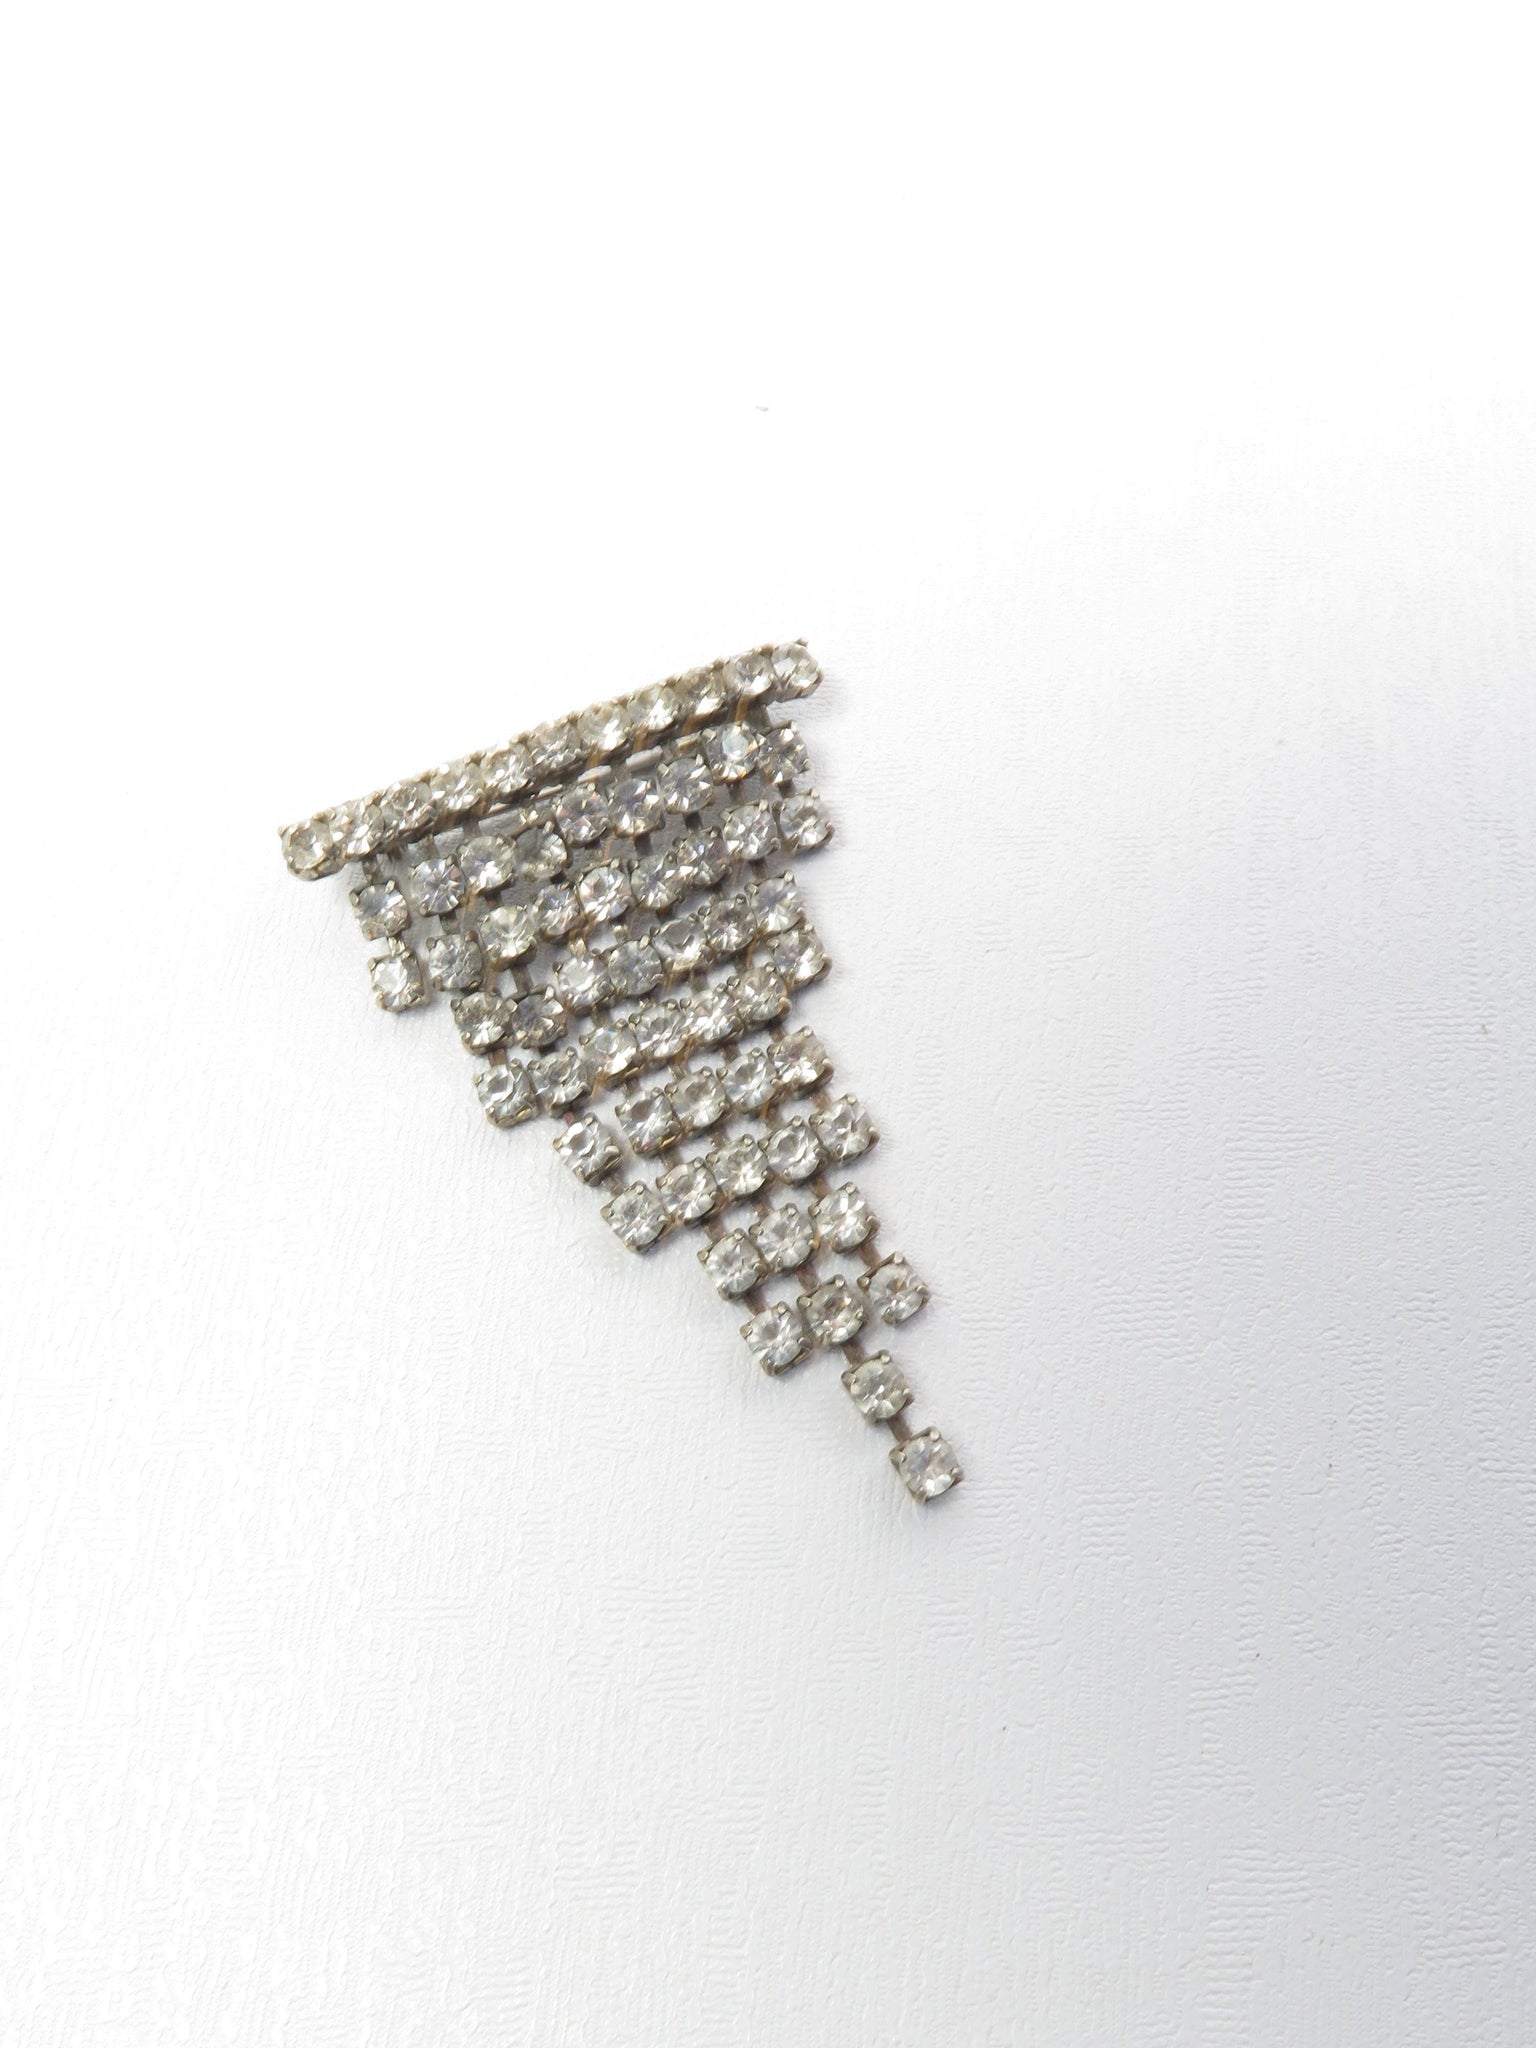 Diamanté Silver Coloured Graduated Brooch - The Harlequin